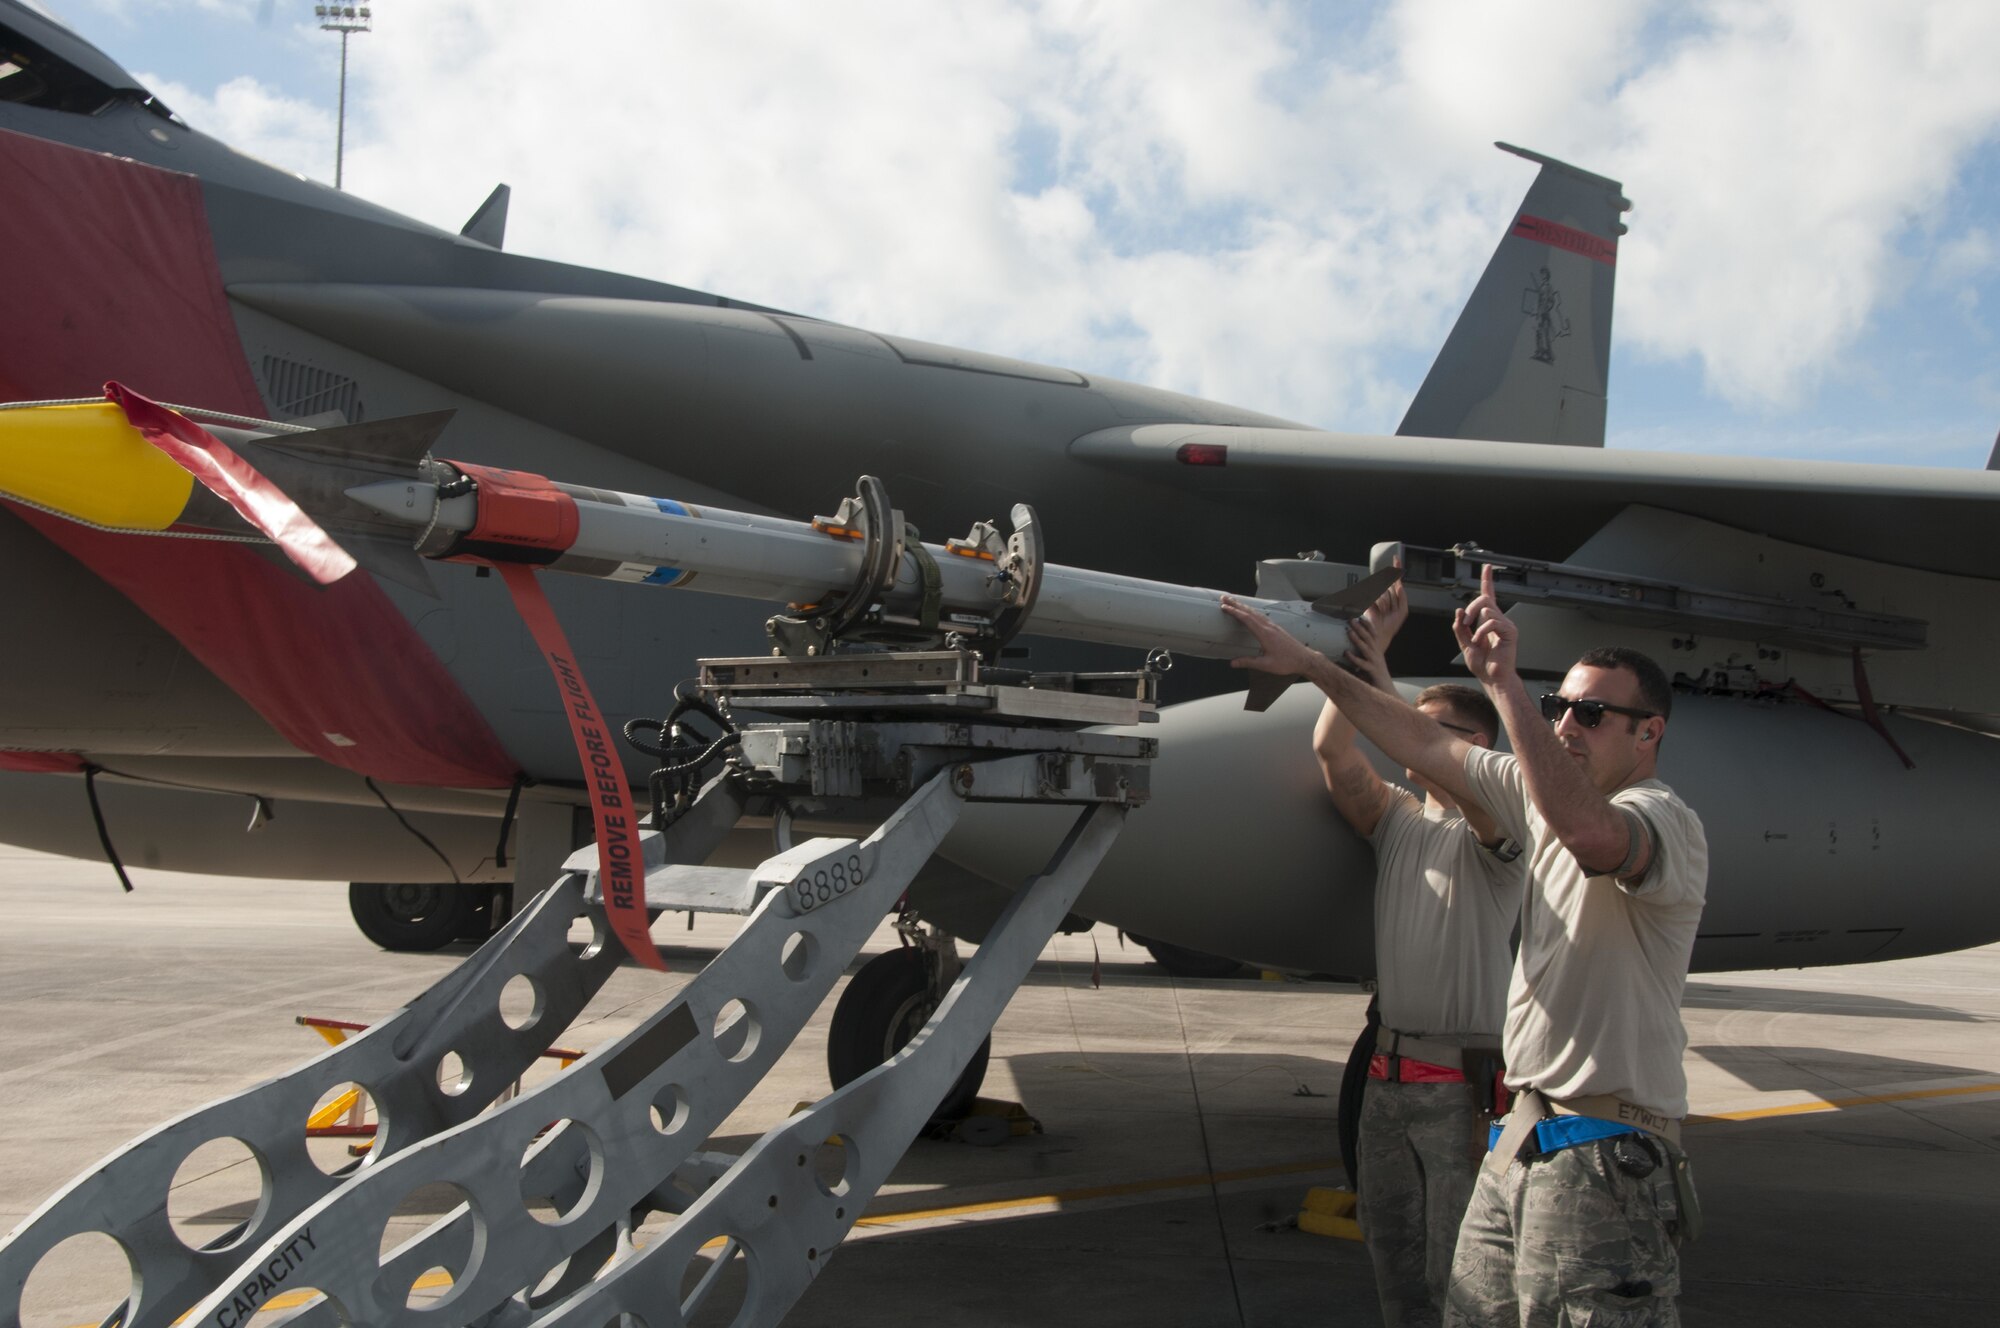 Tech Sgt. Lucas Hagopian of the 104th Fighter Wing, directs his load crew while arming the F-15 Eagle with an Aim 9X at the U.S. Air Force’s Weapons System Evaluation Program (WSEP) at Tyndall, Air Force Base, Florida. As a part of the WSEP exercise, the aircraft are loaded and shoot live missiles. The purpose of WSEP to gauge operational effectiveness, to verify weapons system performance, determine reliability, and evaluate capability. (U.S. Air National Guard Photo by Senior Master Sgt. Julie Avey)